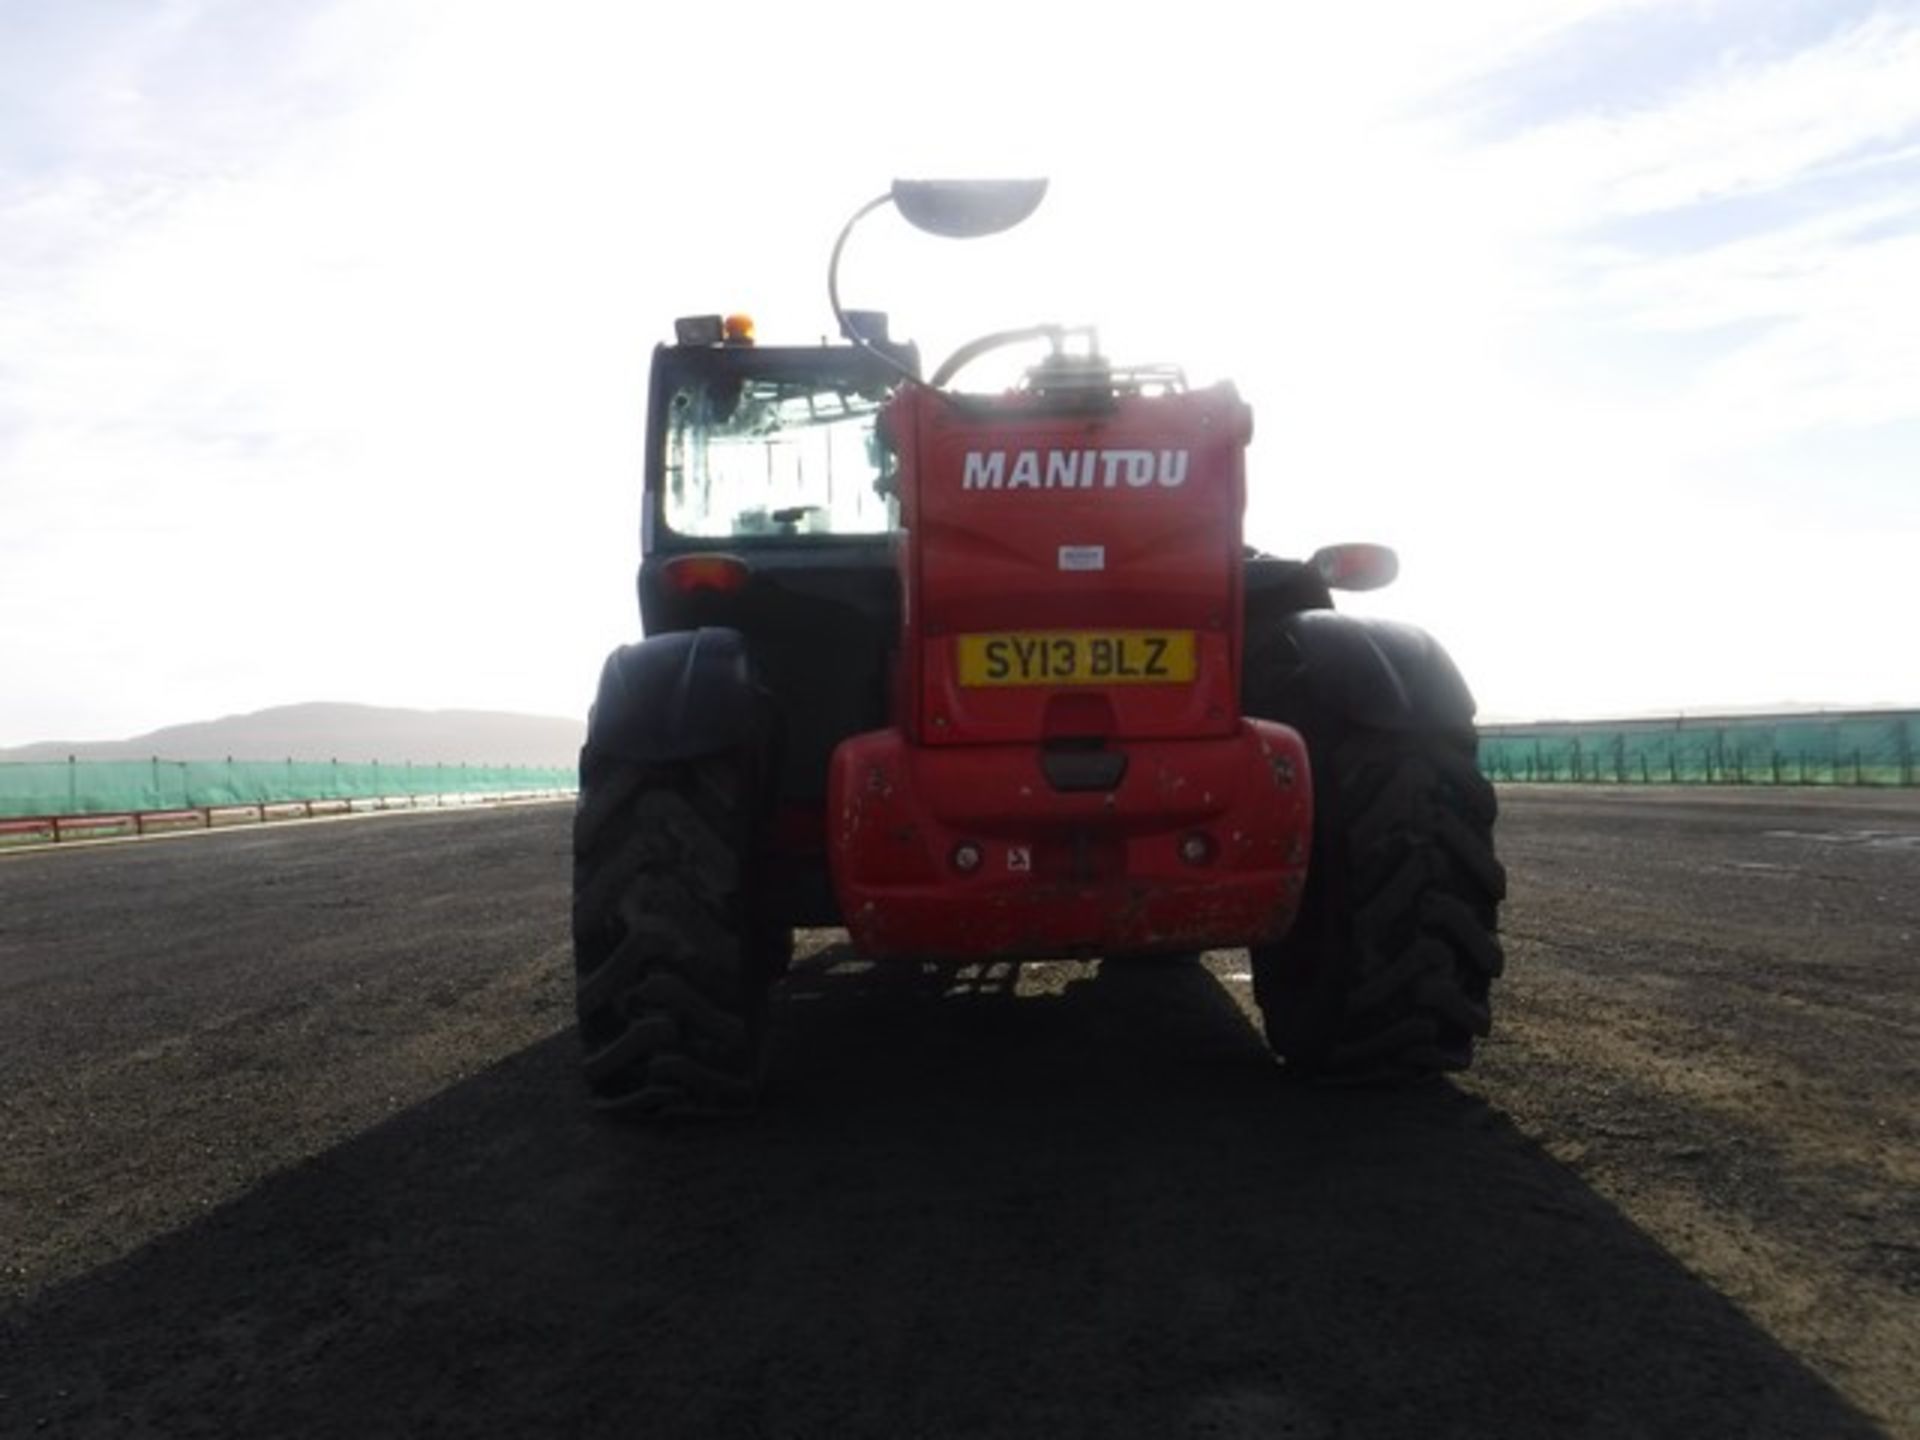 2012 MANITOU MT1840 telehandler c/w pallet forks. CE marked. Lift capacity 4000kg. Max reach 18m. Re - Image 7 of 12